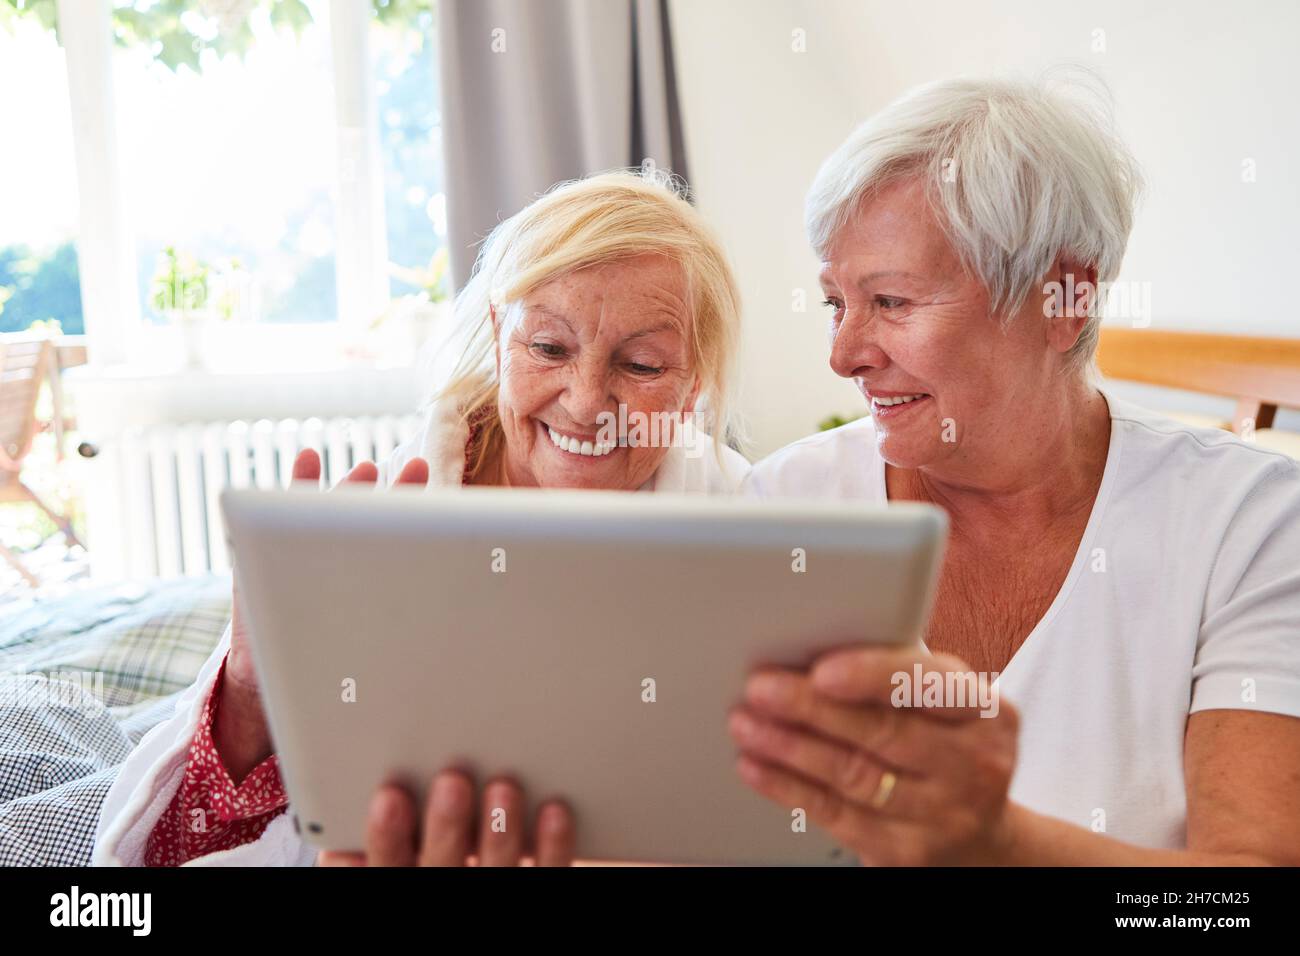 Two seniors have fun on the tablet computer while video chatting on social media at home Stock Photo